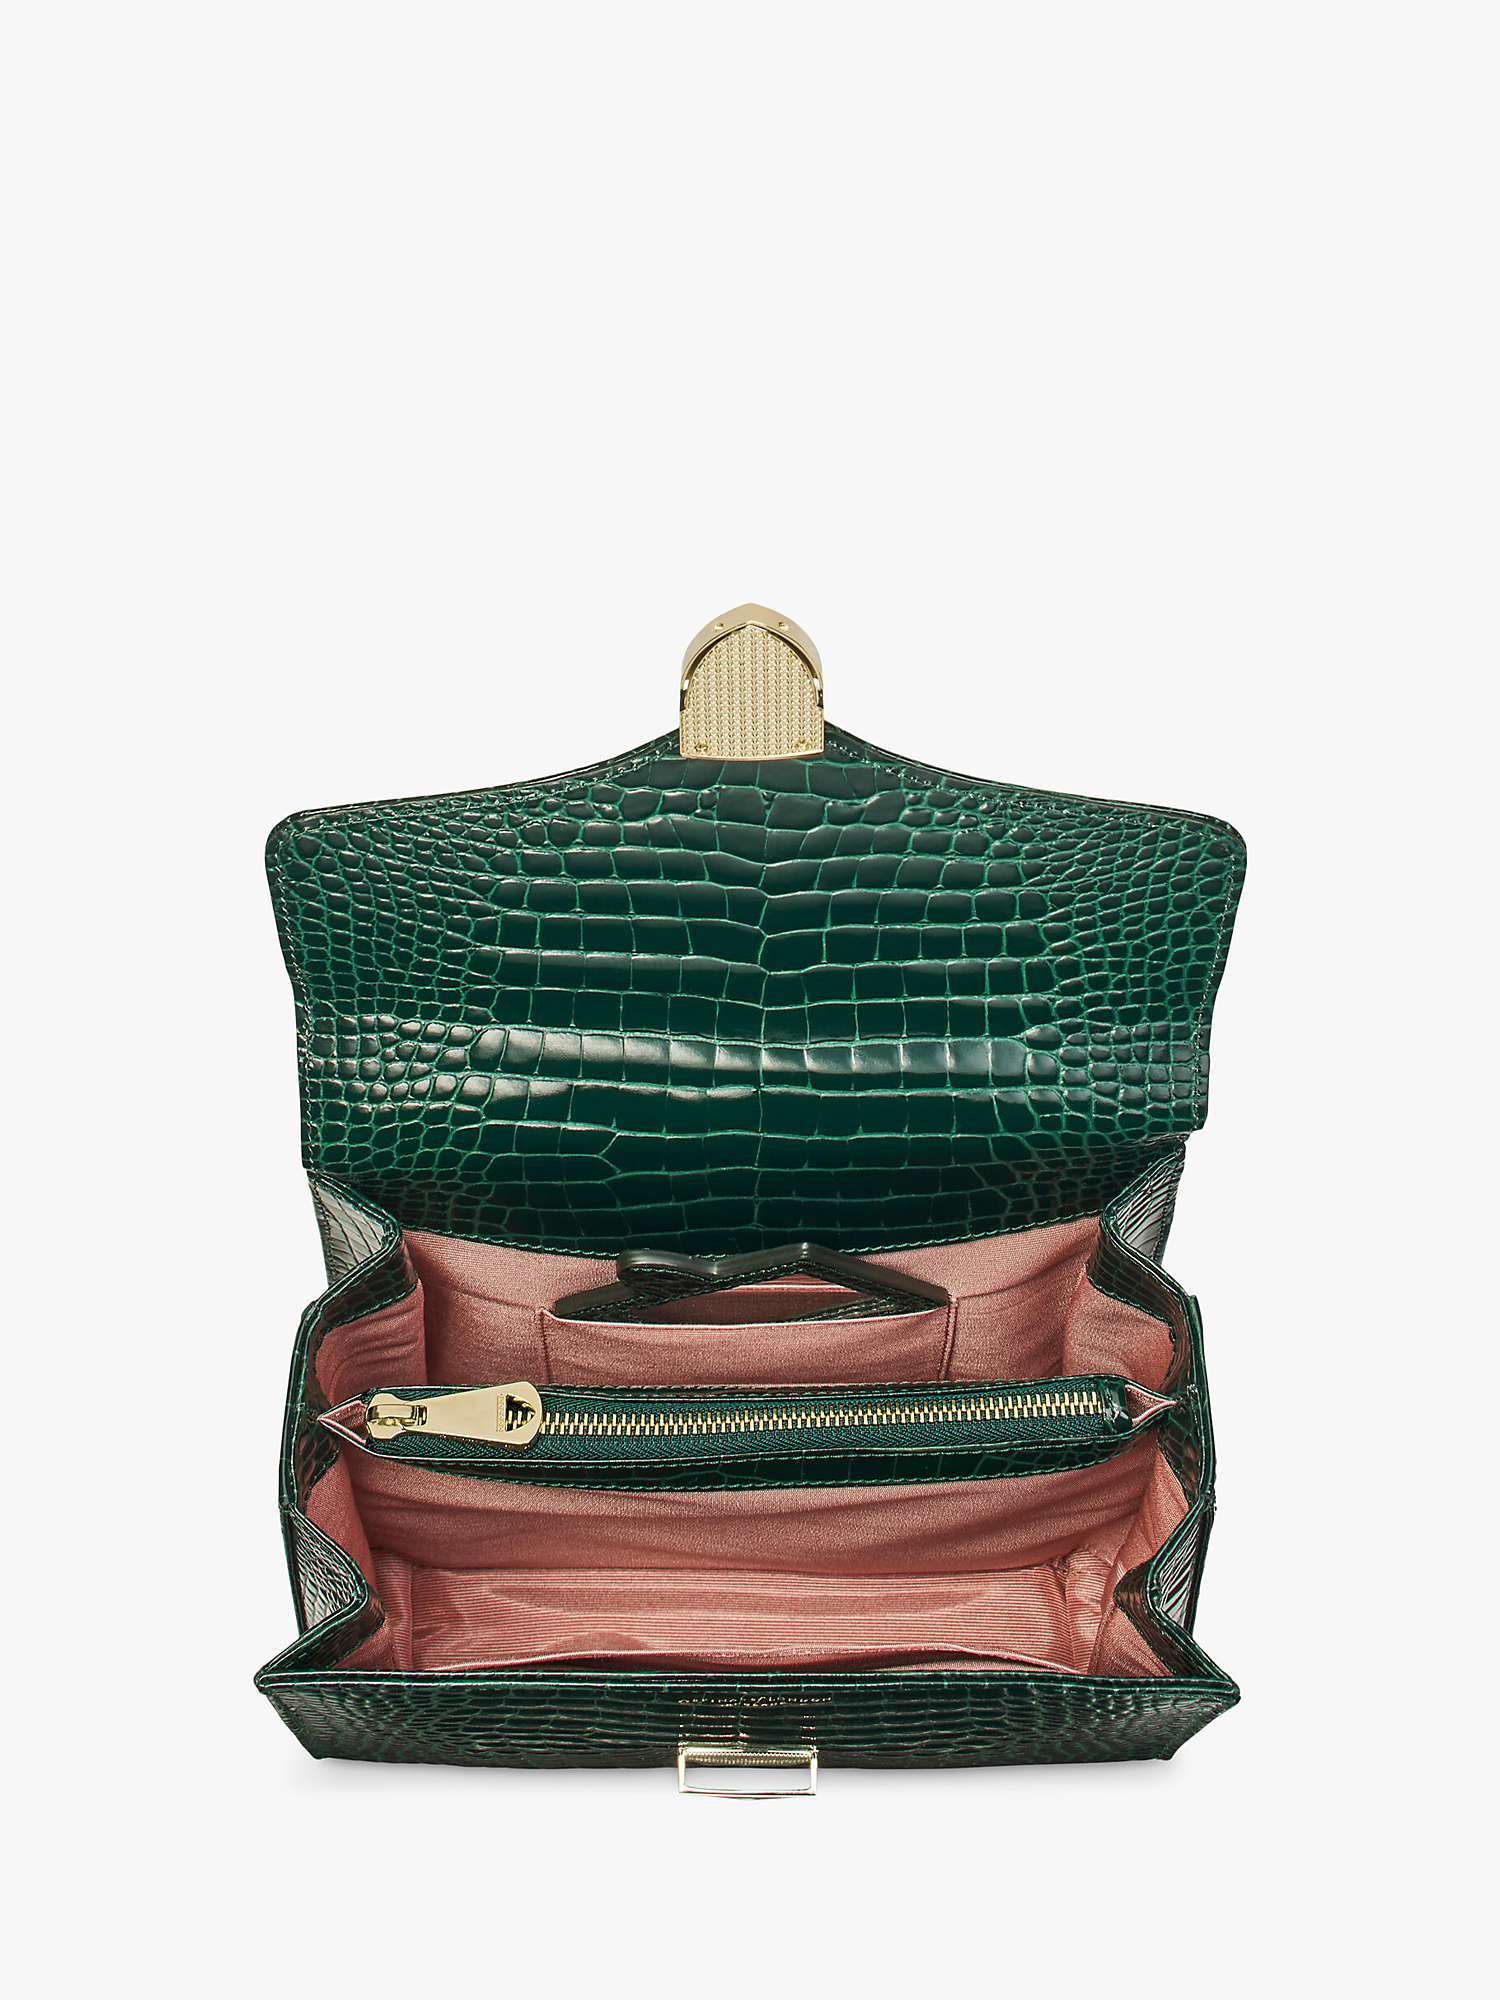 Buy Aspinal of London Mayfair Croc Leather Cross Body Bag Online at johnlewis.com